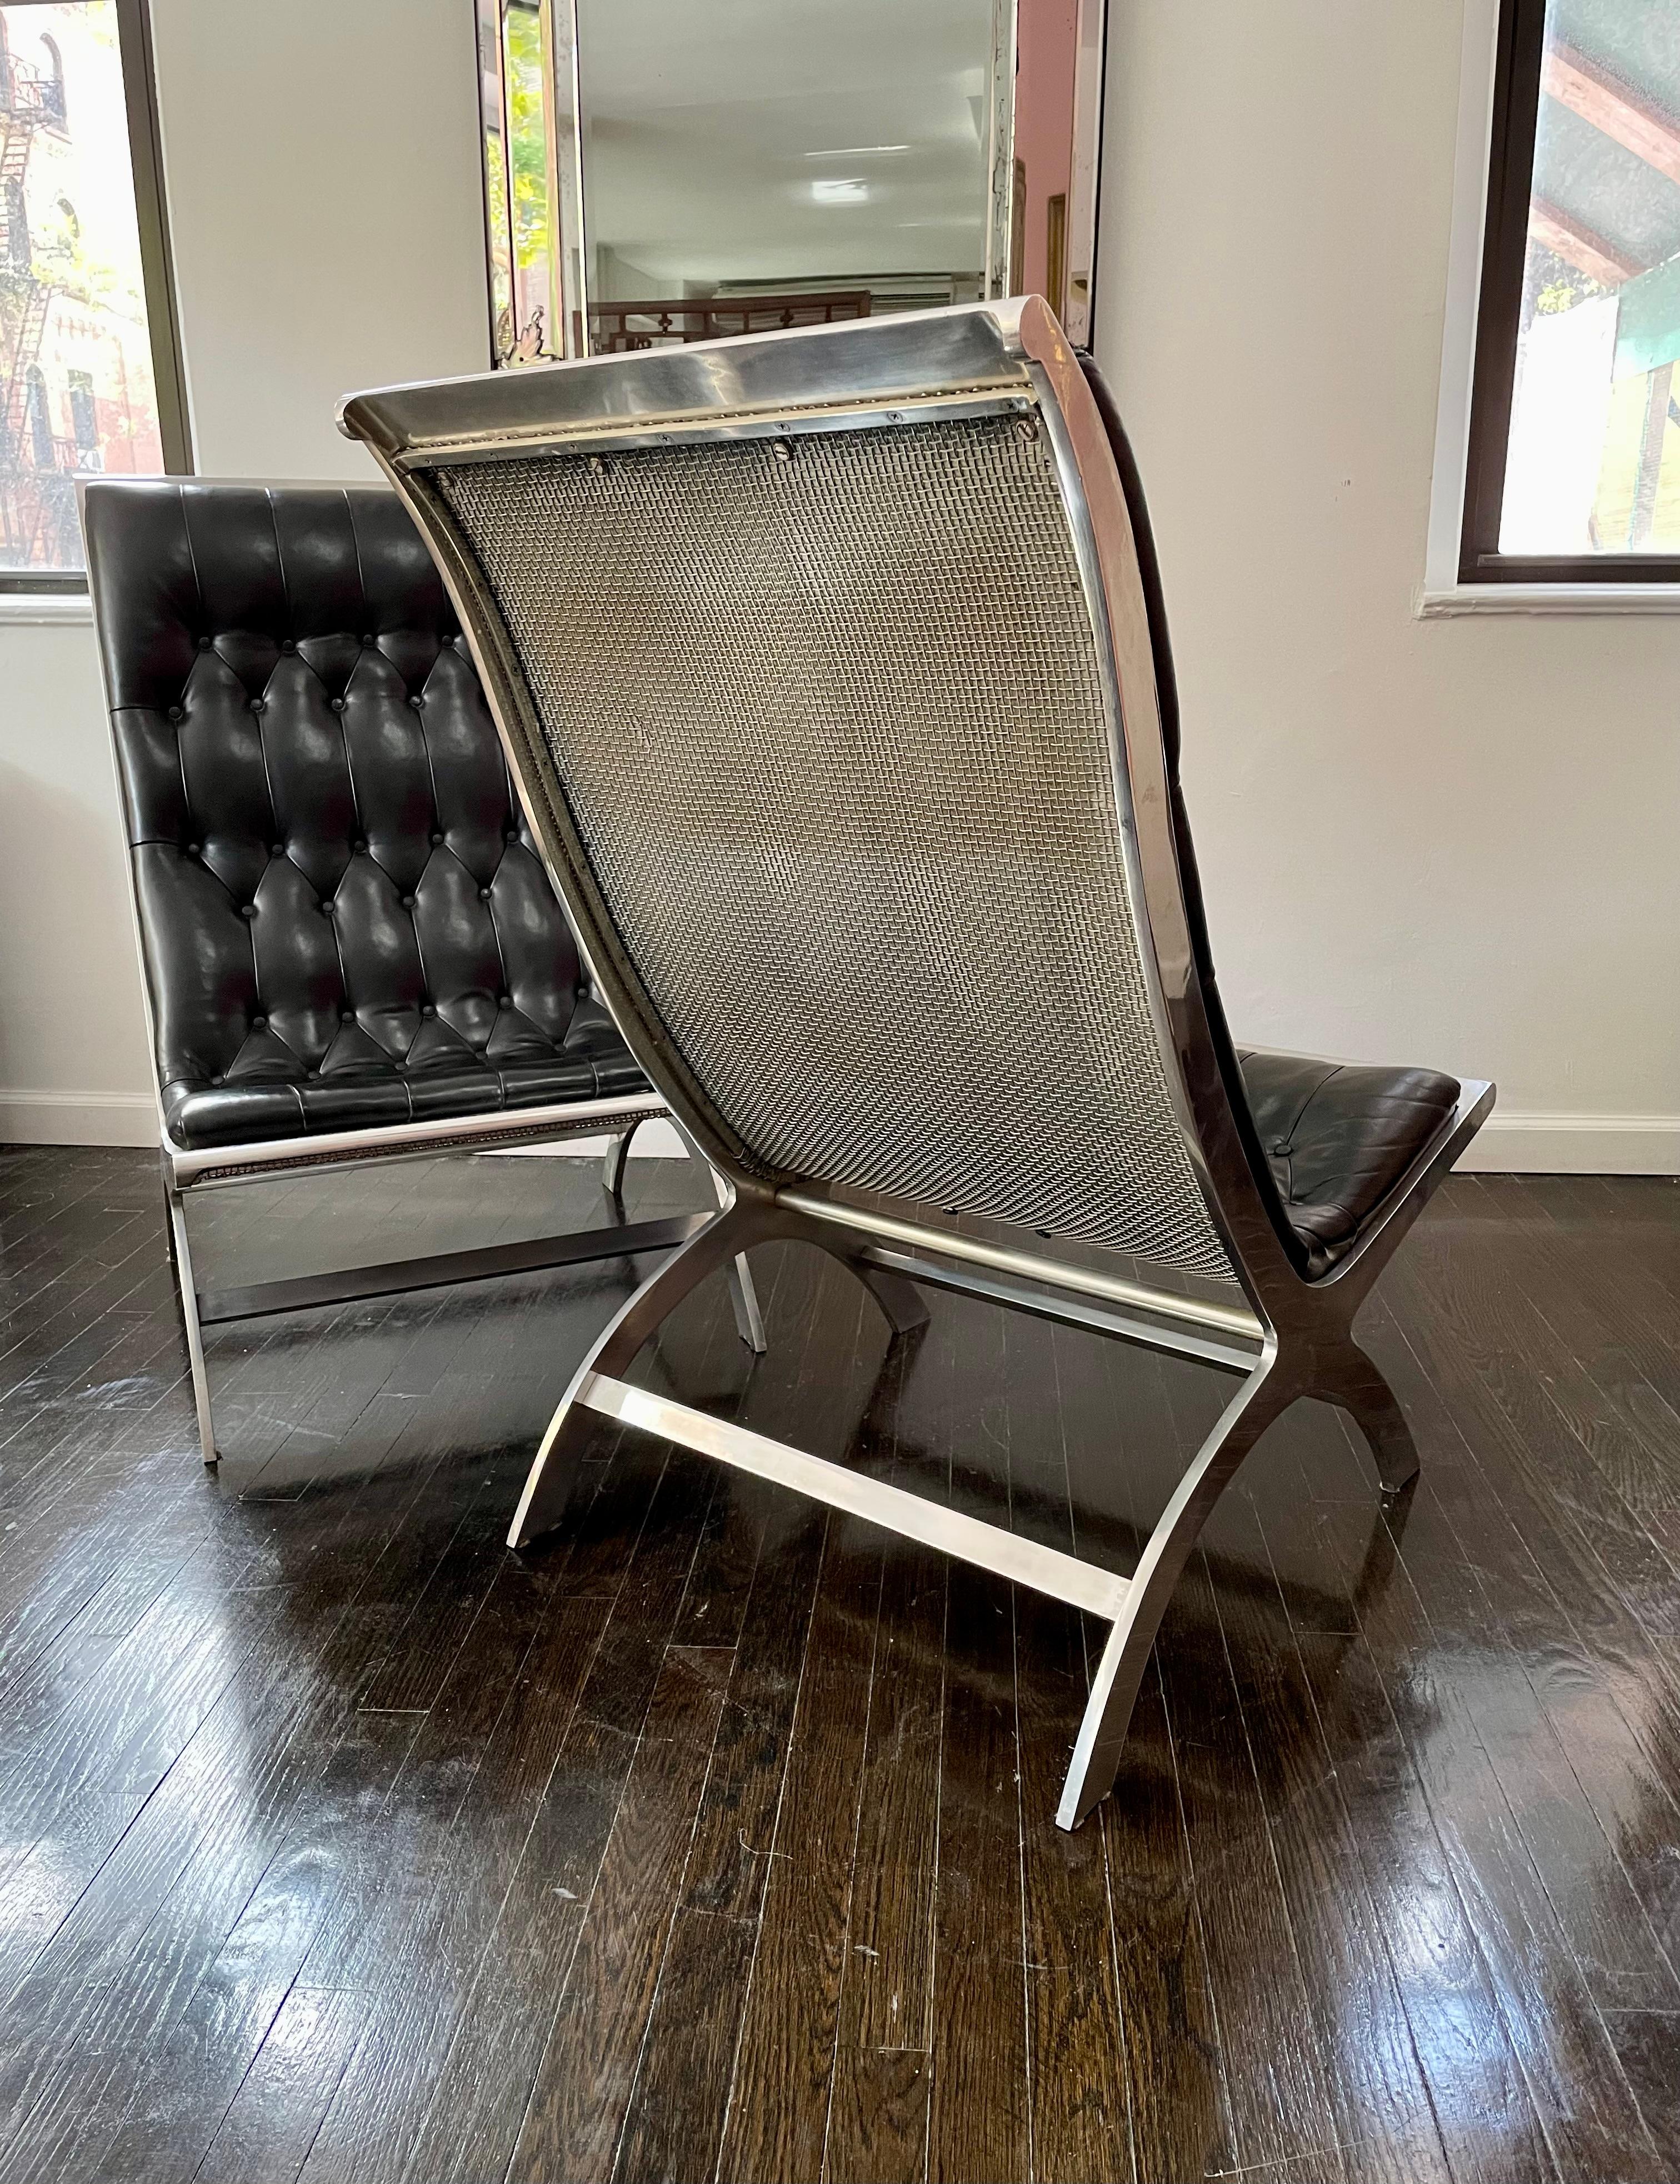 The “Maximilian Lounge Chair” was John Vesey’s finest and most celebrated chair design — it was also his most expensive one to produce, and appeared in a 1959 issue of Vogue. The aluminum frame was wrought rather than cast, solid rather than